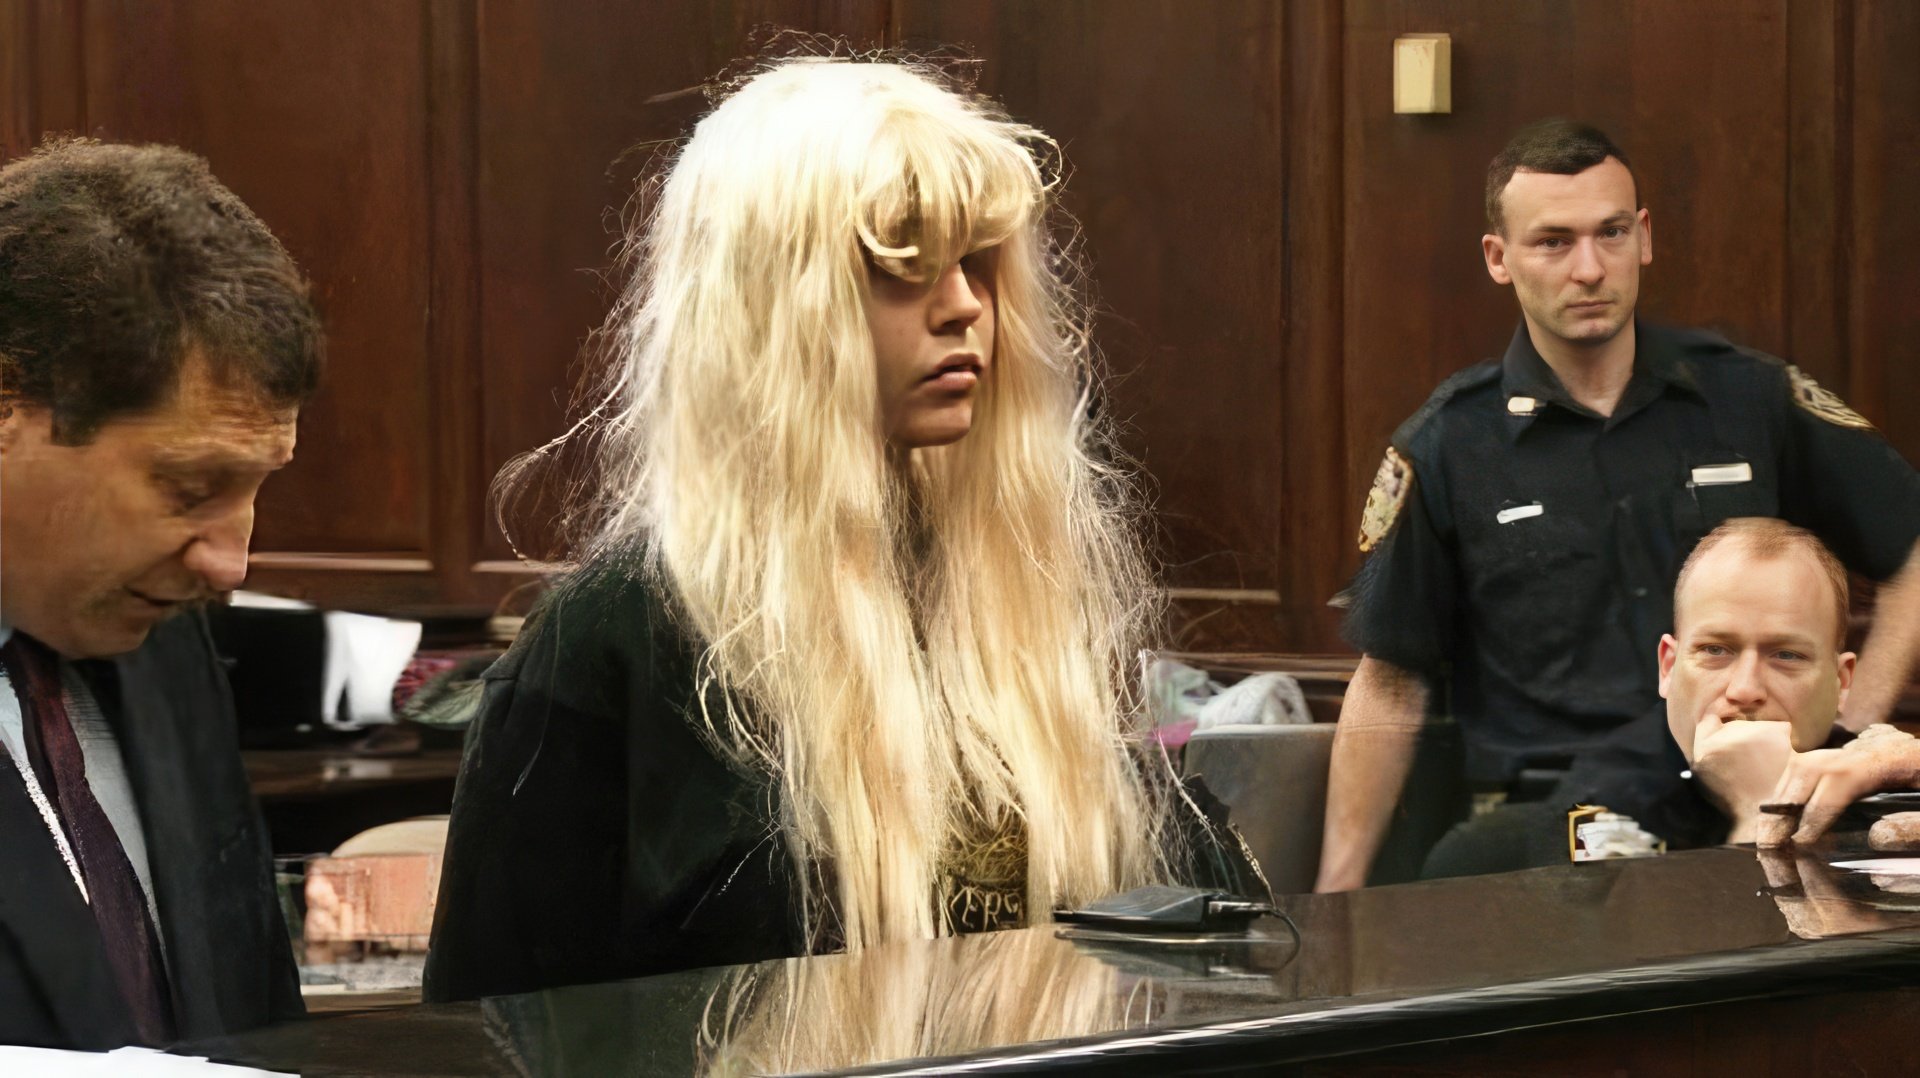 In 2013, Amanda Bynes was convicted of drunkenness and drug use